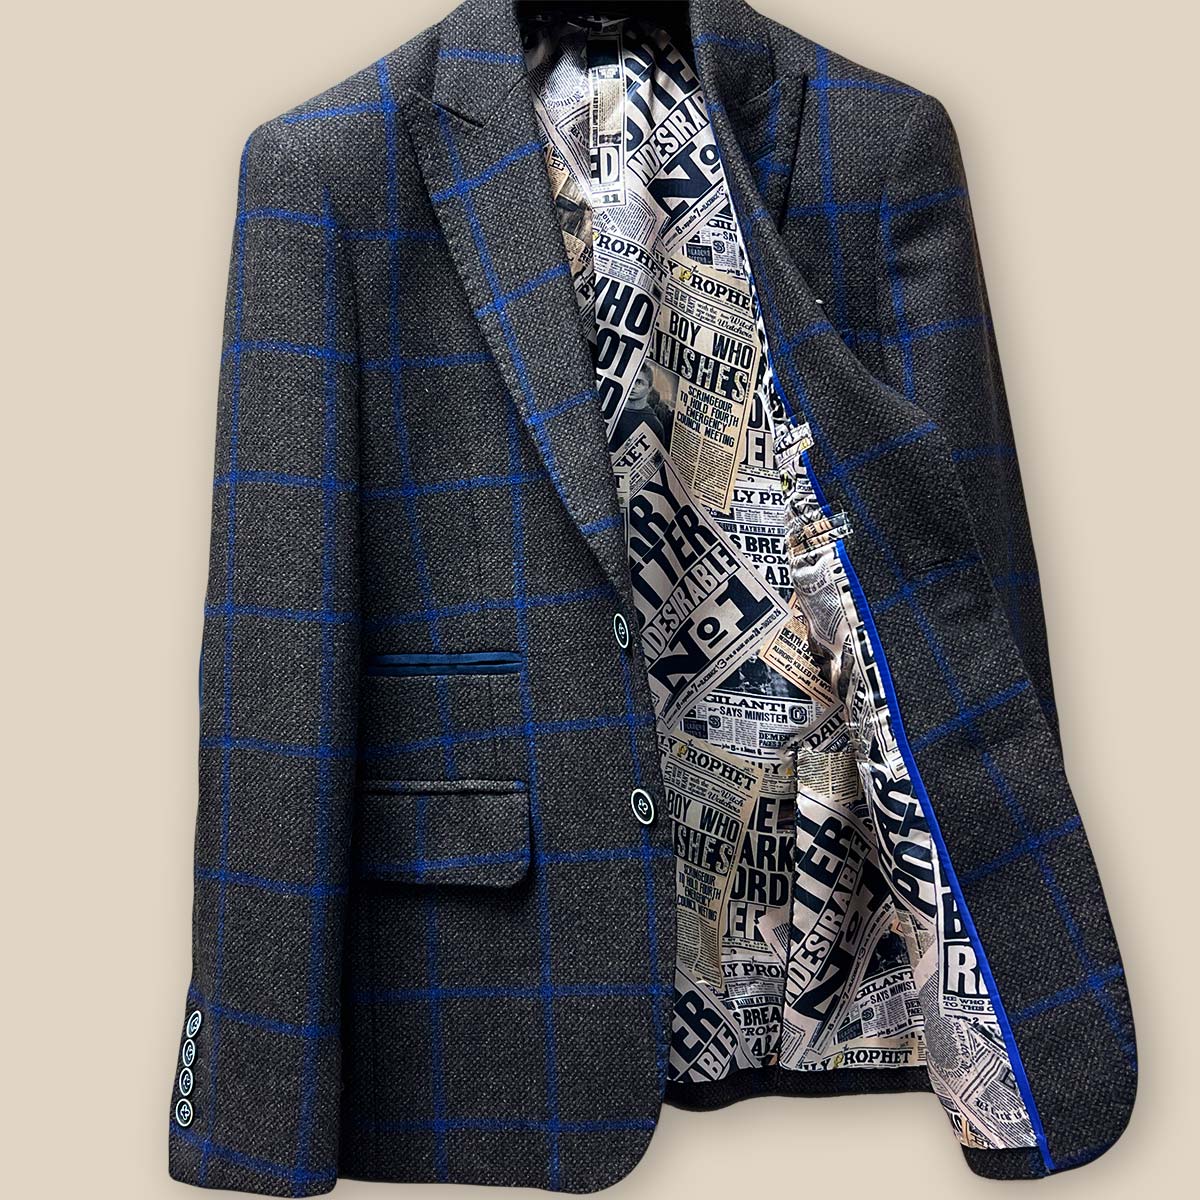 Inside left view of the Westwood Hart sportcoat, showcasing the Harry Potter newspaper theme lining and interior pocket.